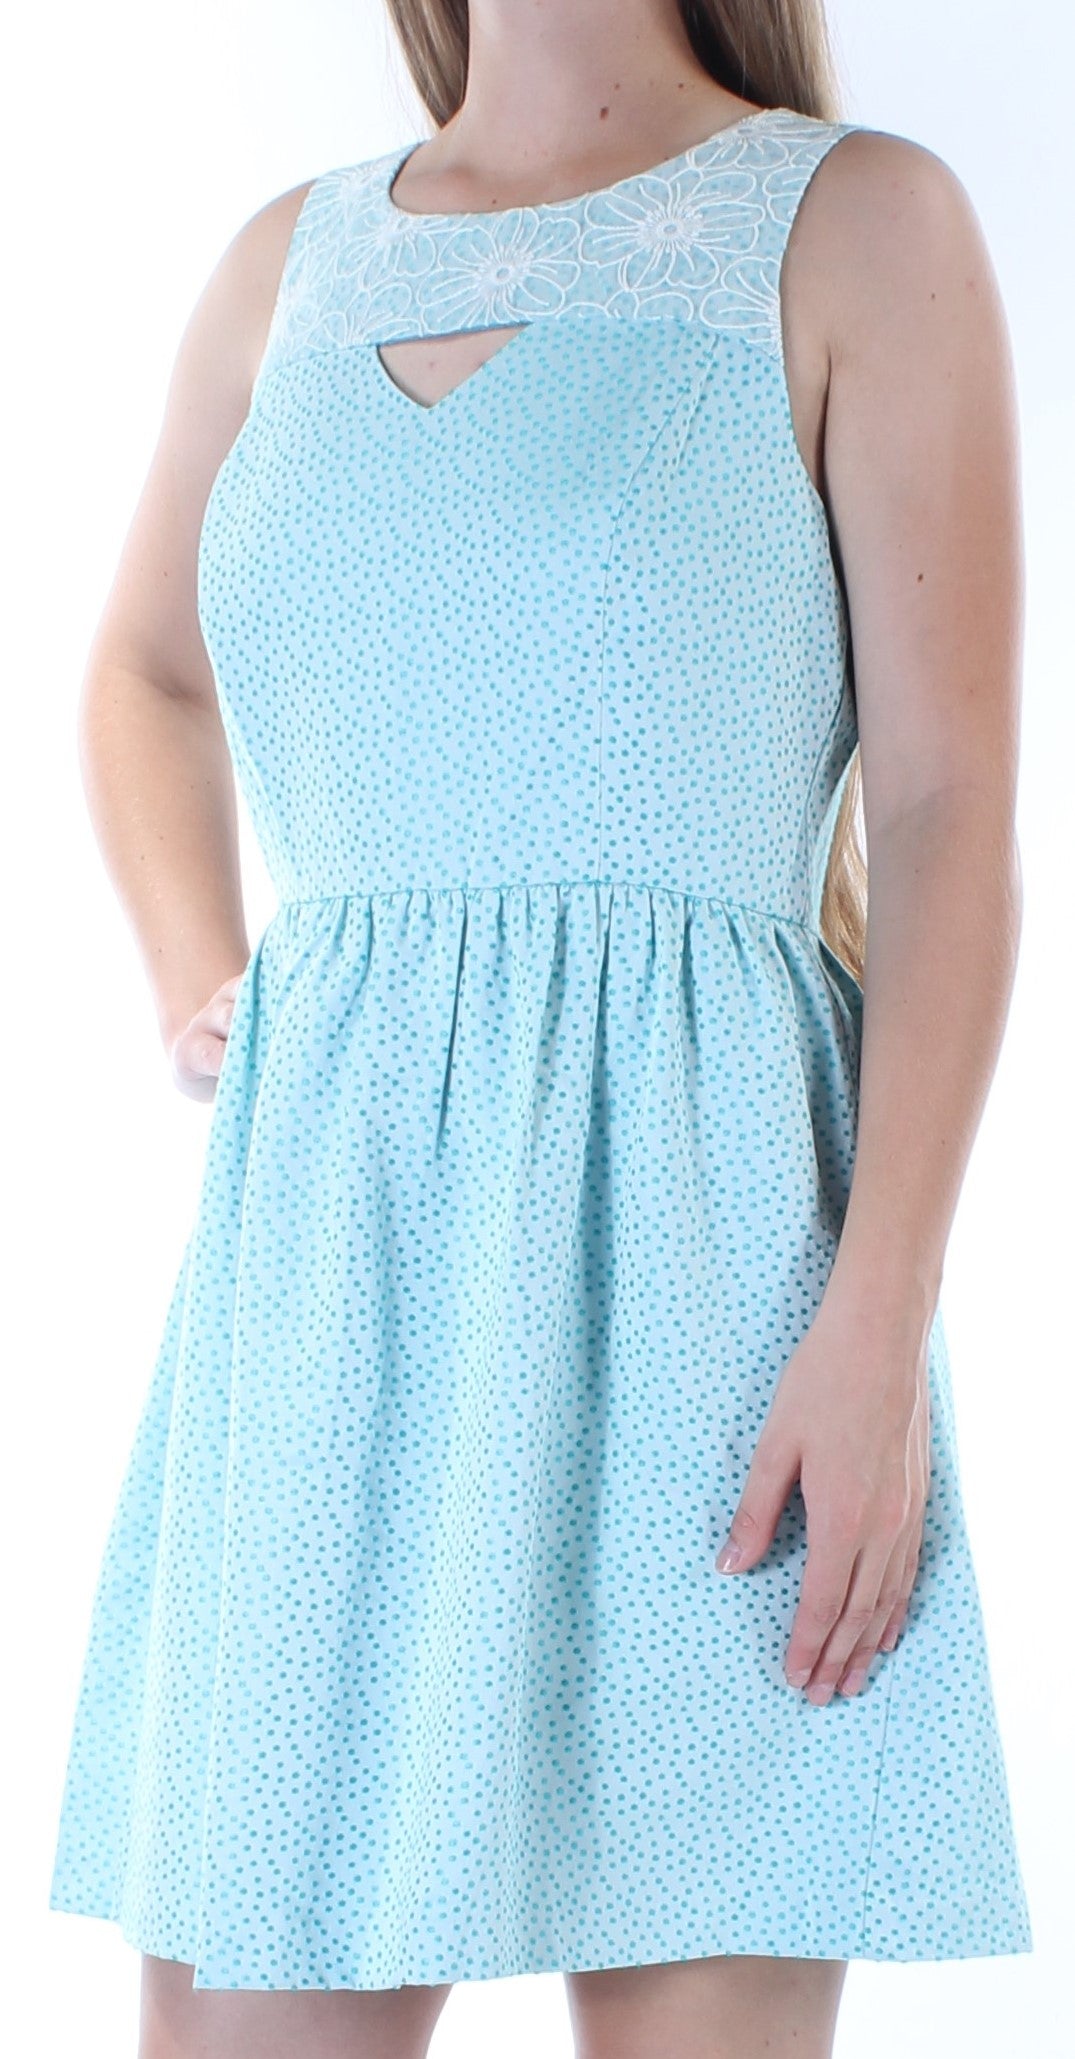 KENSIE Womens Light Blue Cut Out  Embroidered Polka Dot Sleeveless Jewel Neck Above The Knee Dress